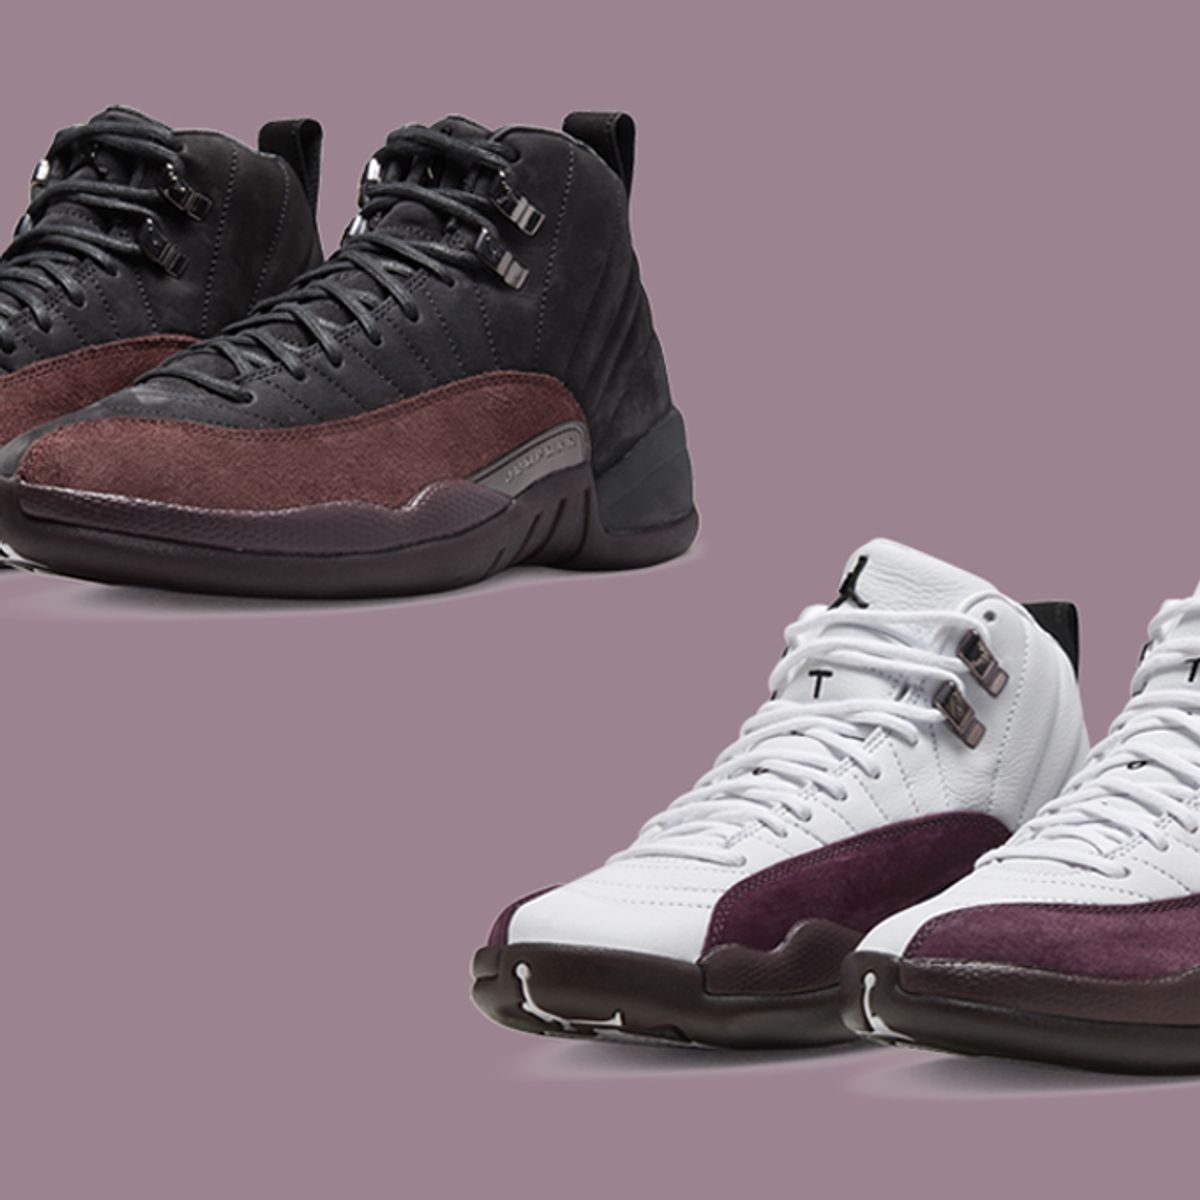 Where to Buy the A Ma Maniére x Air Jordan 12s - Sneaker Freaker